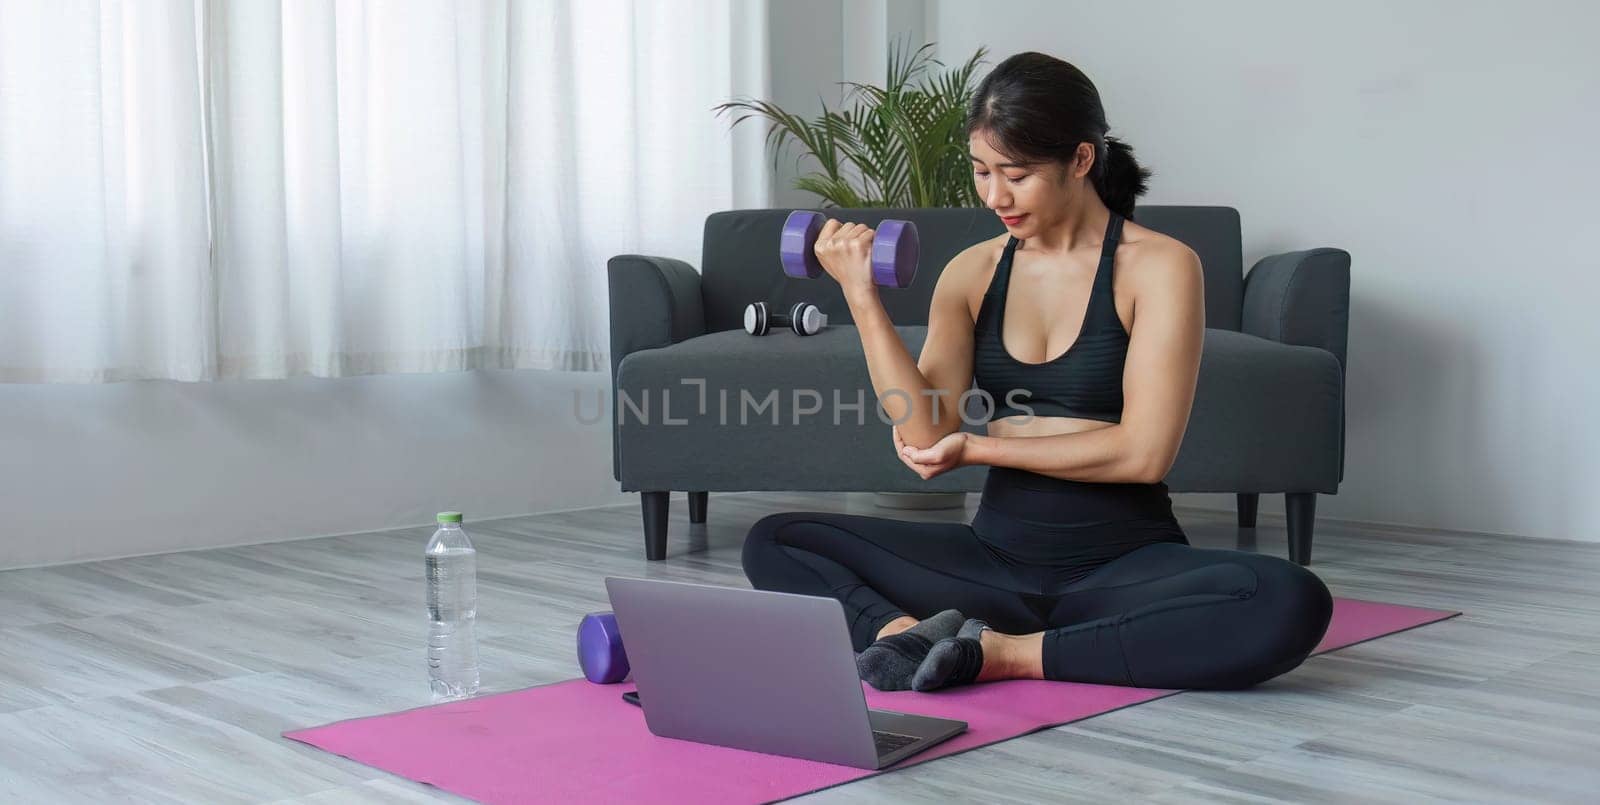 Young woman exercising in front of laptop Wear a sports bar outfit. Do yoga and lift dumbbells on the exercise mat. by wichayada